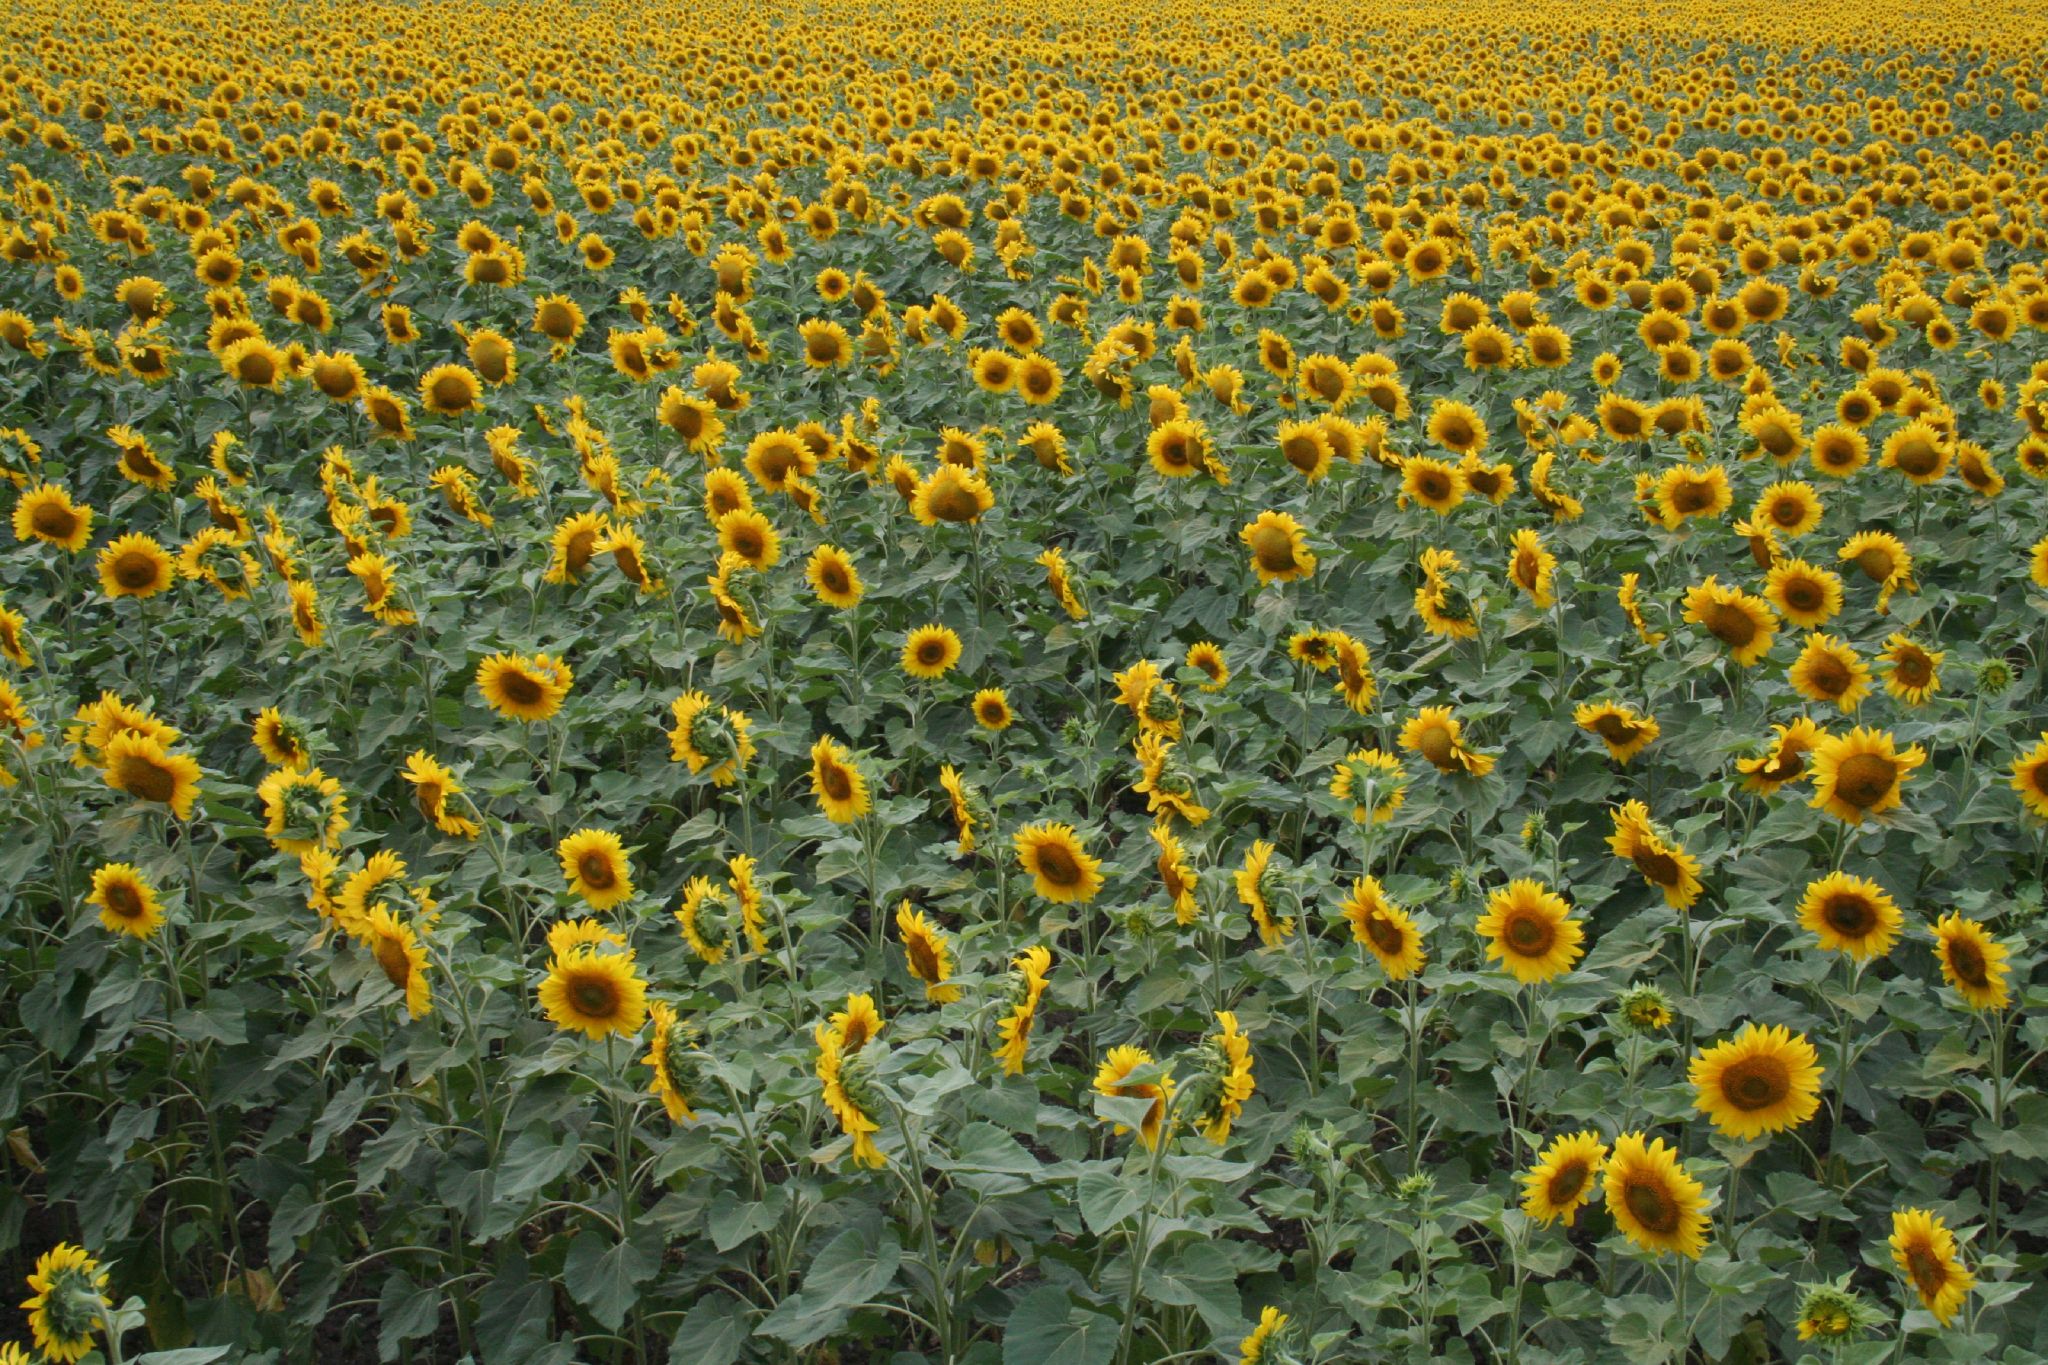 many sunflowers are in full bloom and one lone